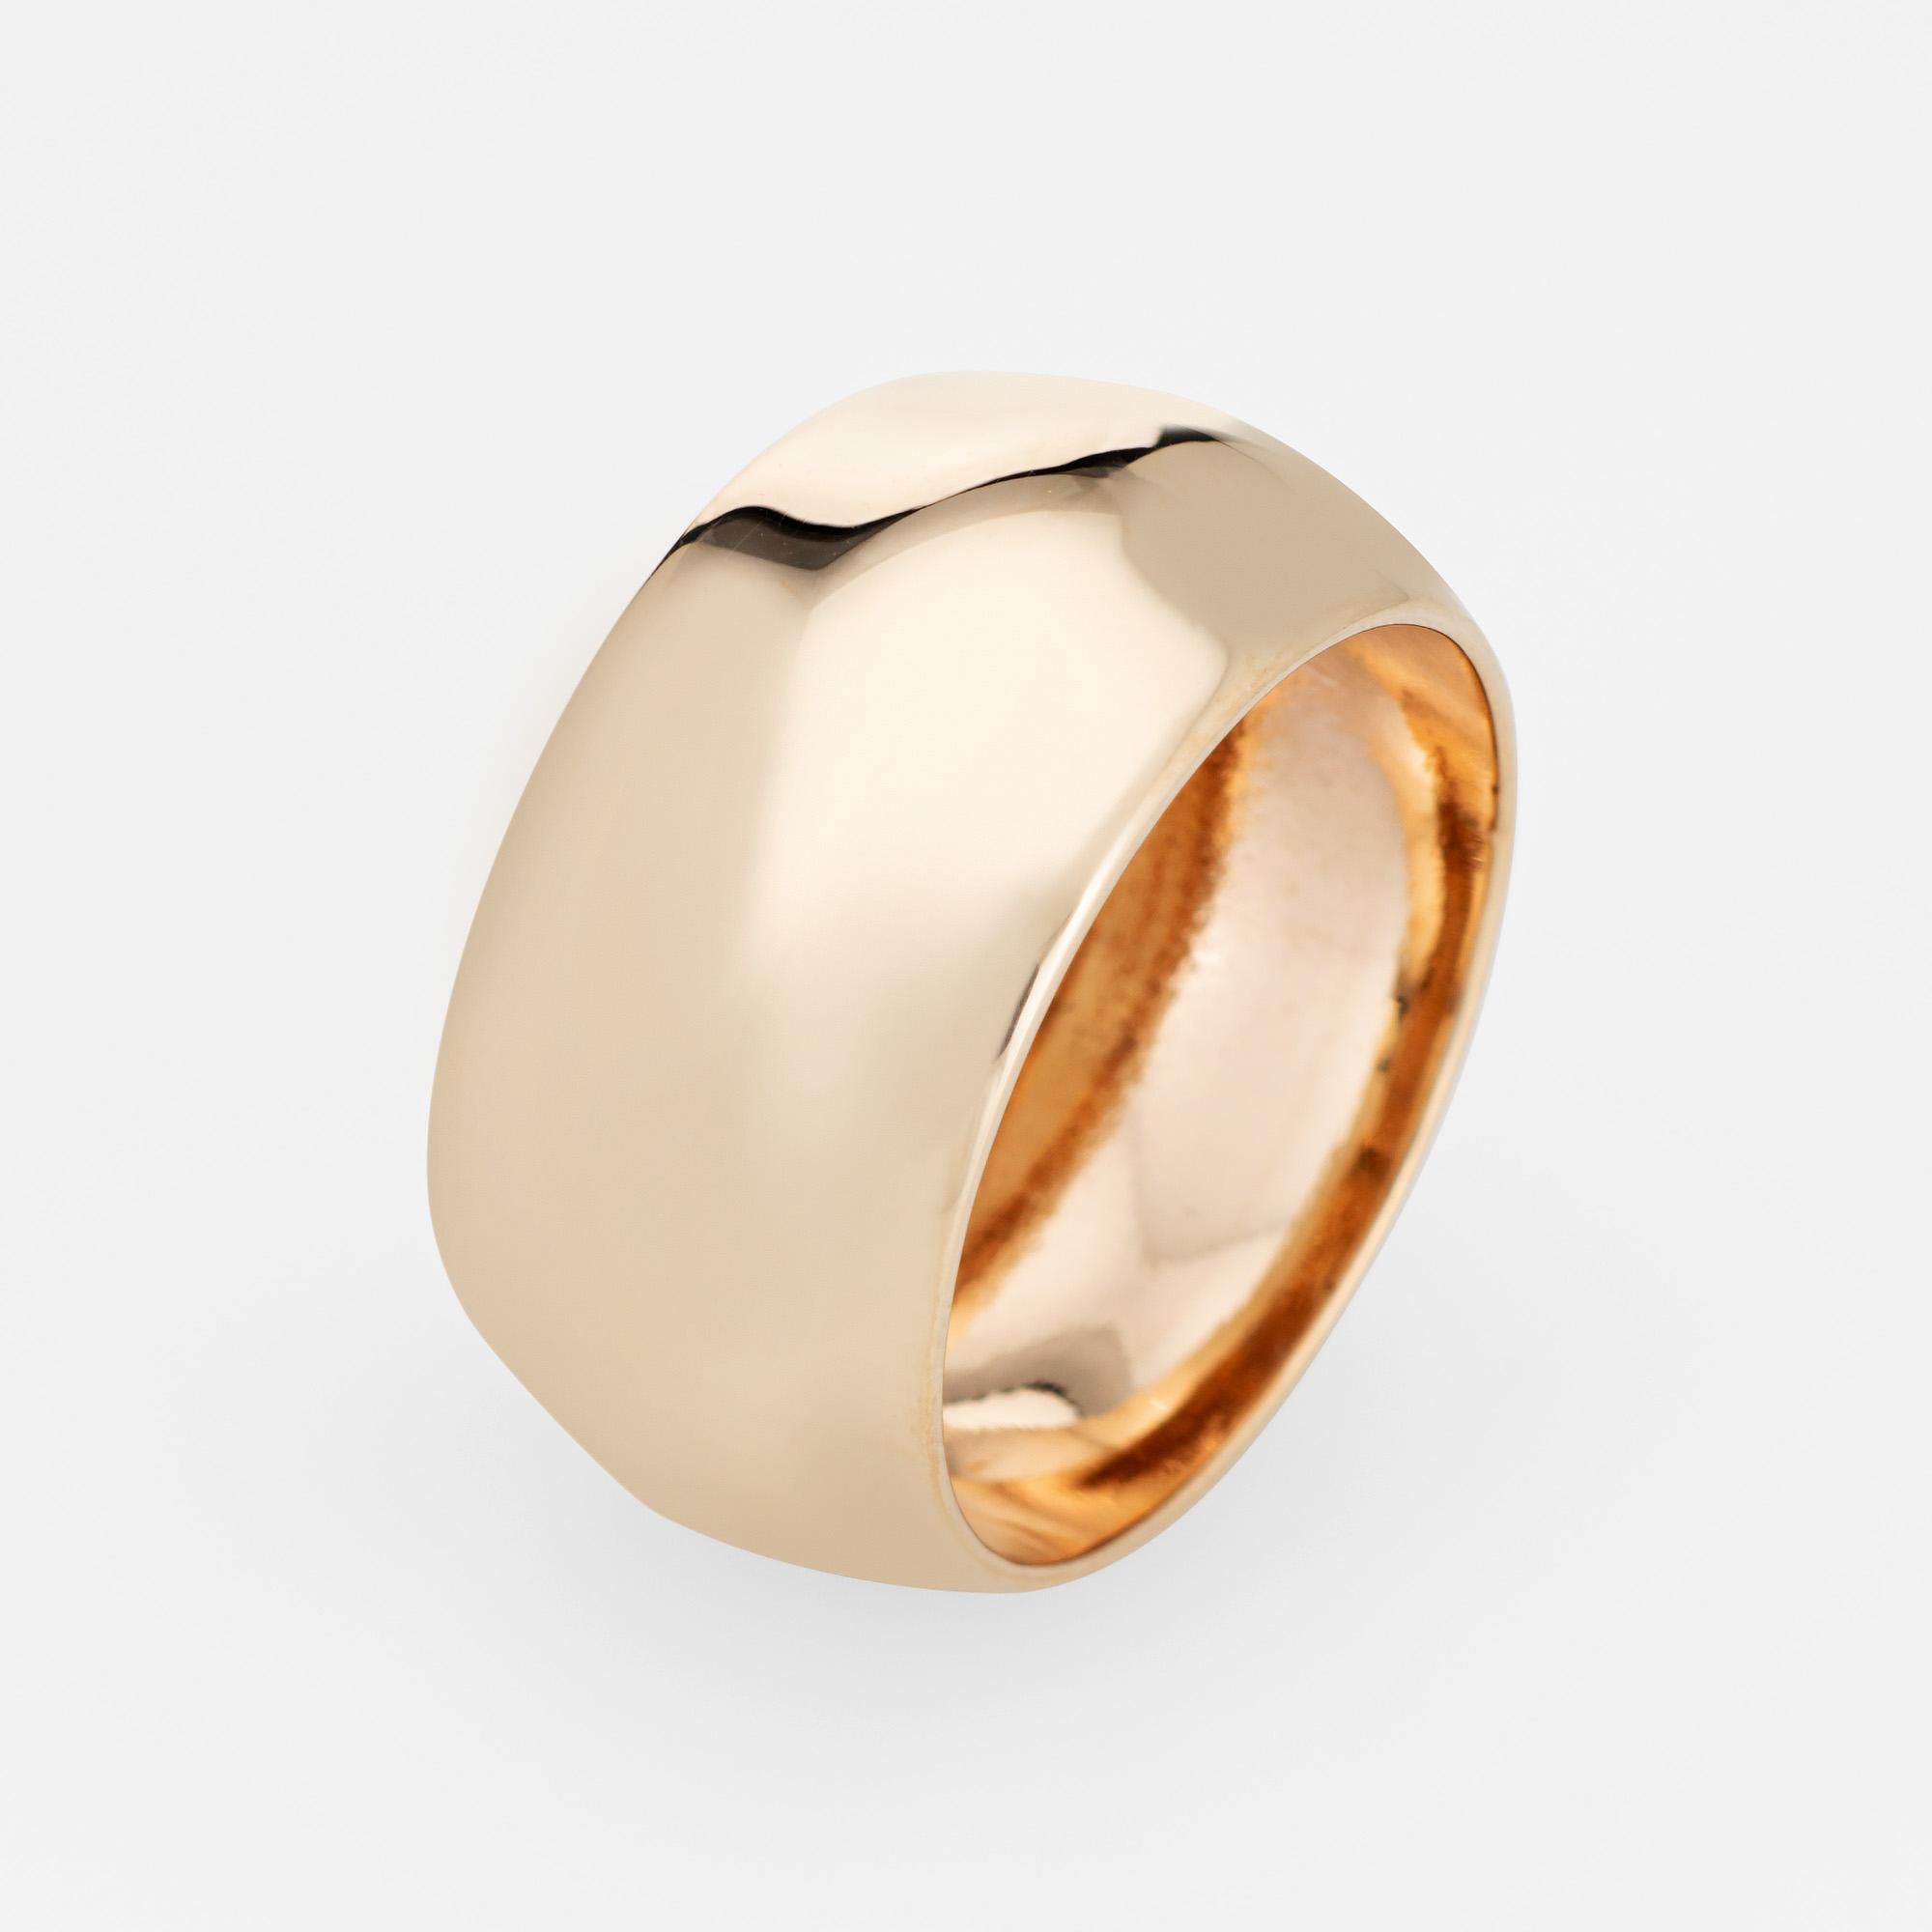 Stylish vintage wide band (circa 1980s) crafted in 14 karat yellow gold. 

The unique wide 10mm (0.39 inches) ring features a raised ridge to the center of the band. Great worn alone or stacked with your fine jewelry from any era.  

The ring is in